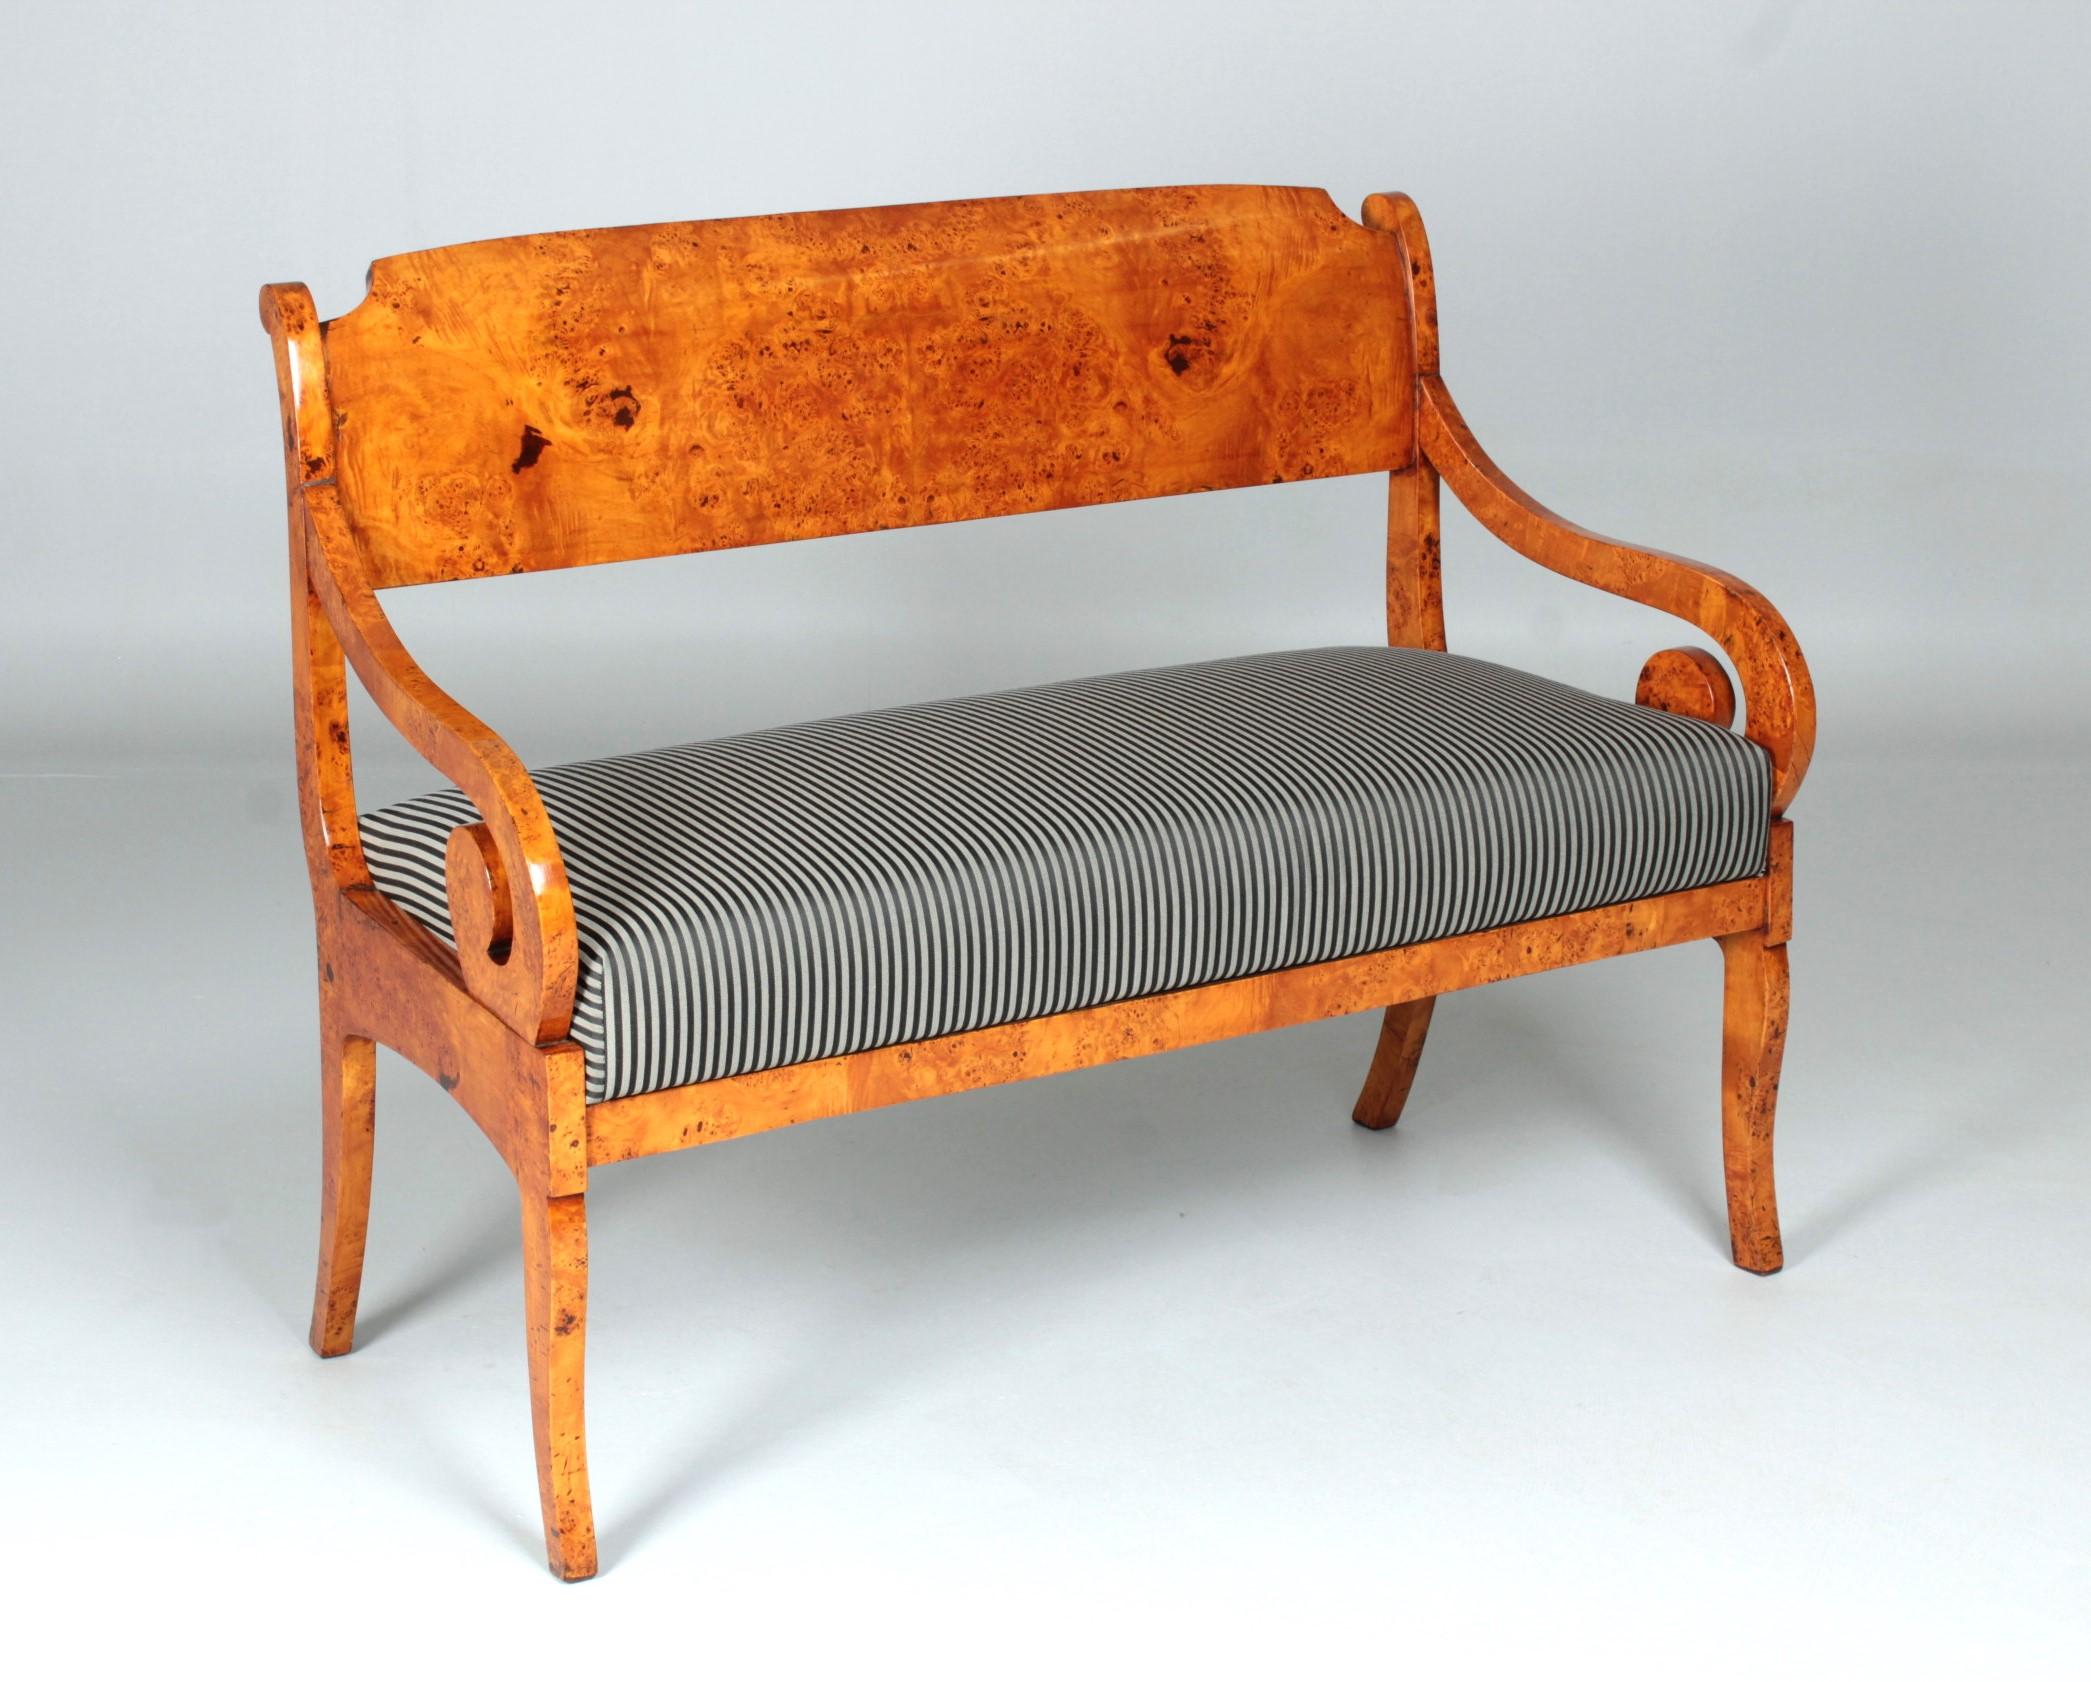 Antique Biedermeier bench

Baltic States / Russia
Burl wood
Biedermeier circa 1835

Dimensions: H x W x D: 96 x 125 x 53 cm, seat height: 50 cm

Description:
Antique bench for two people. Due to the high seat and firm upholstery, the bench is well